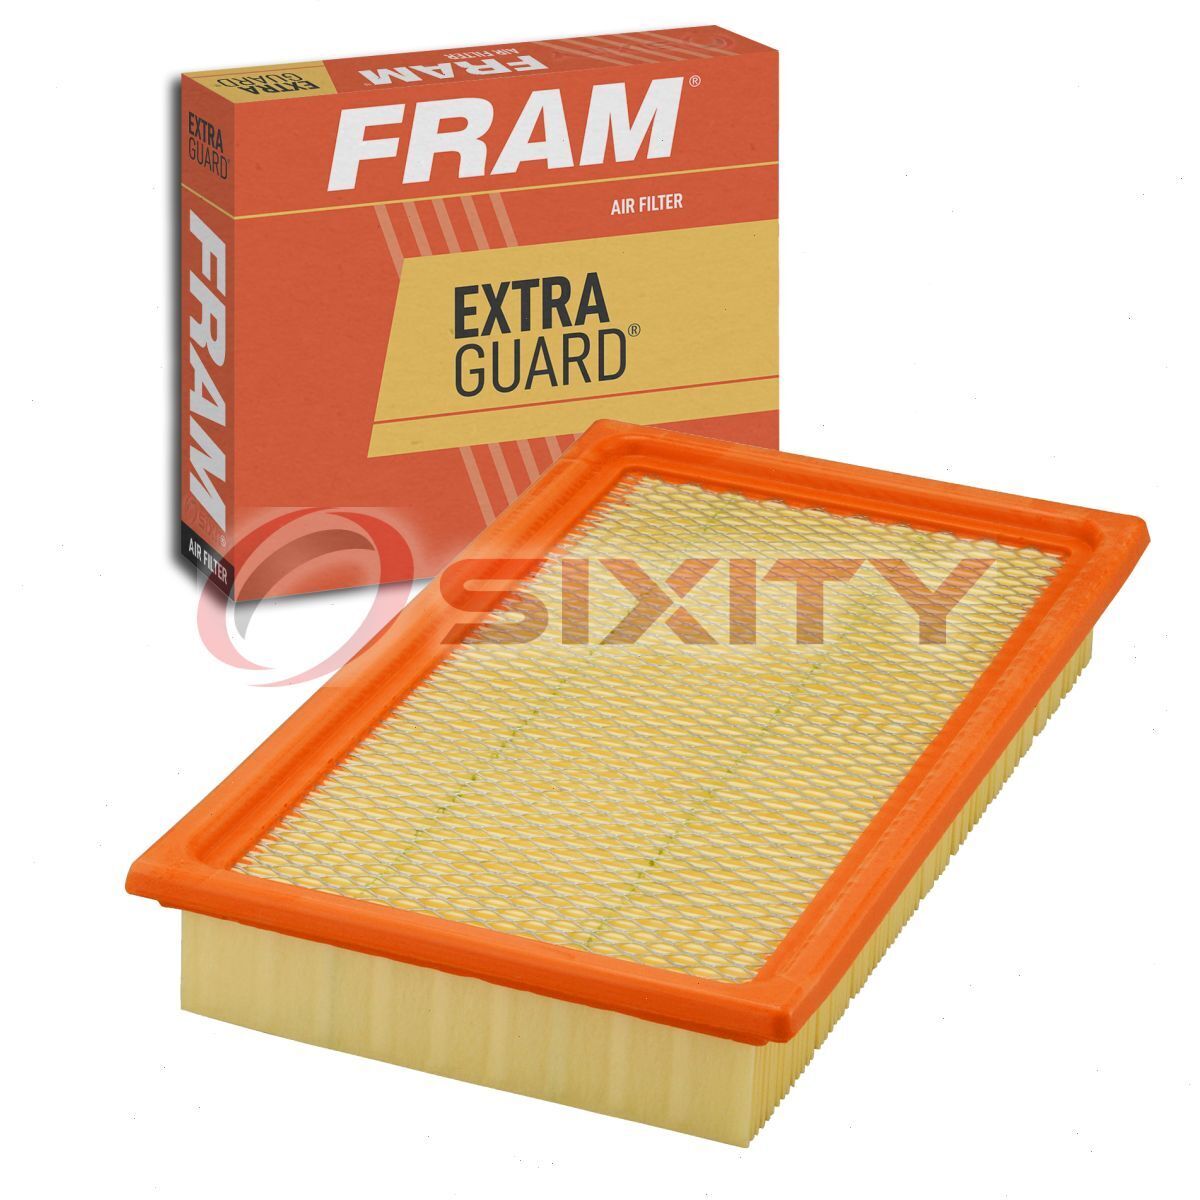 FRAM Extra Guard Air Filter for 2007-2015 Mazda CX-9 Intake Inlet Manifold md